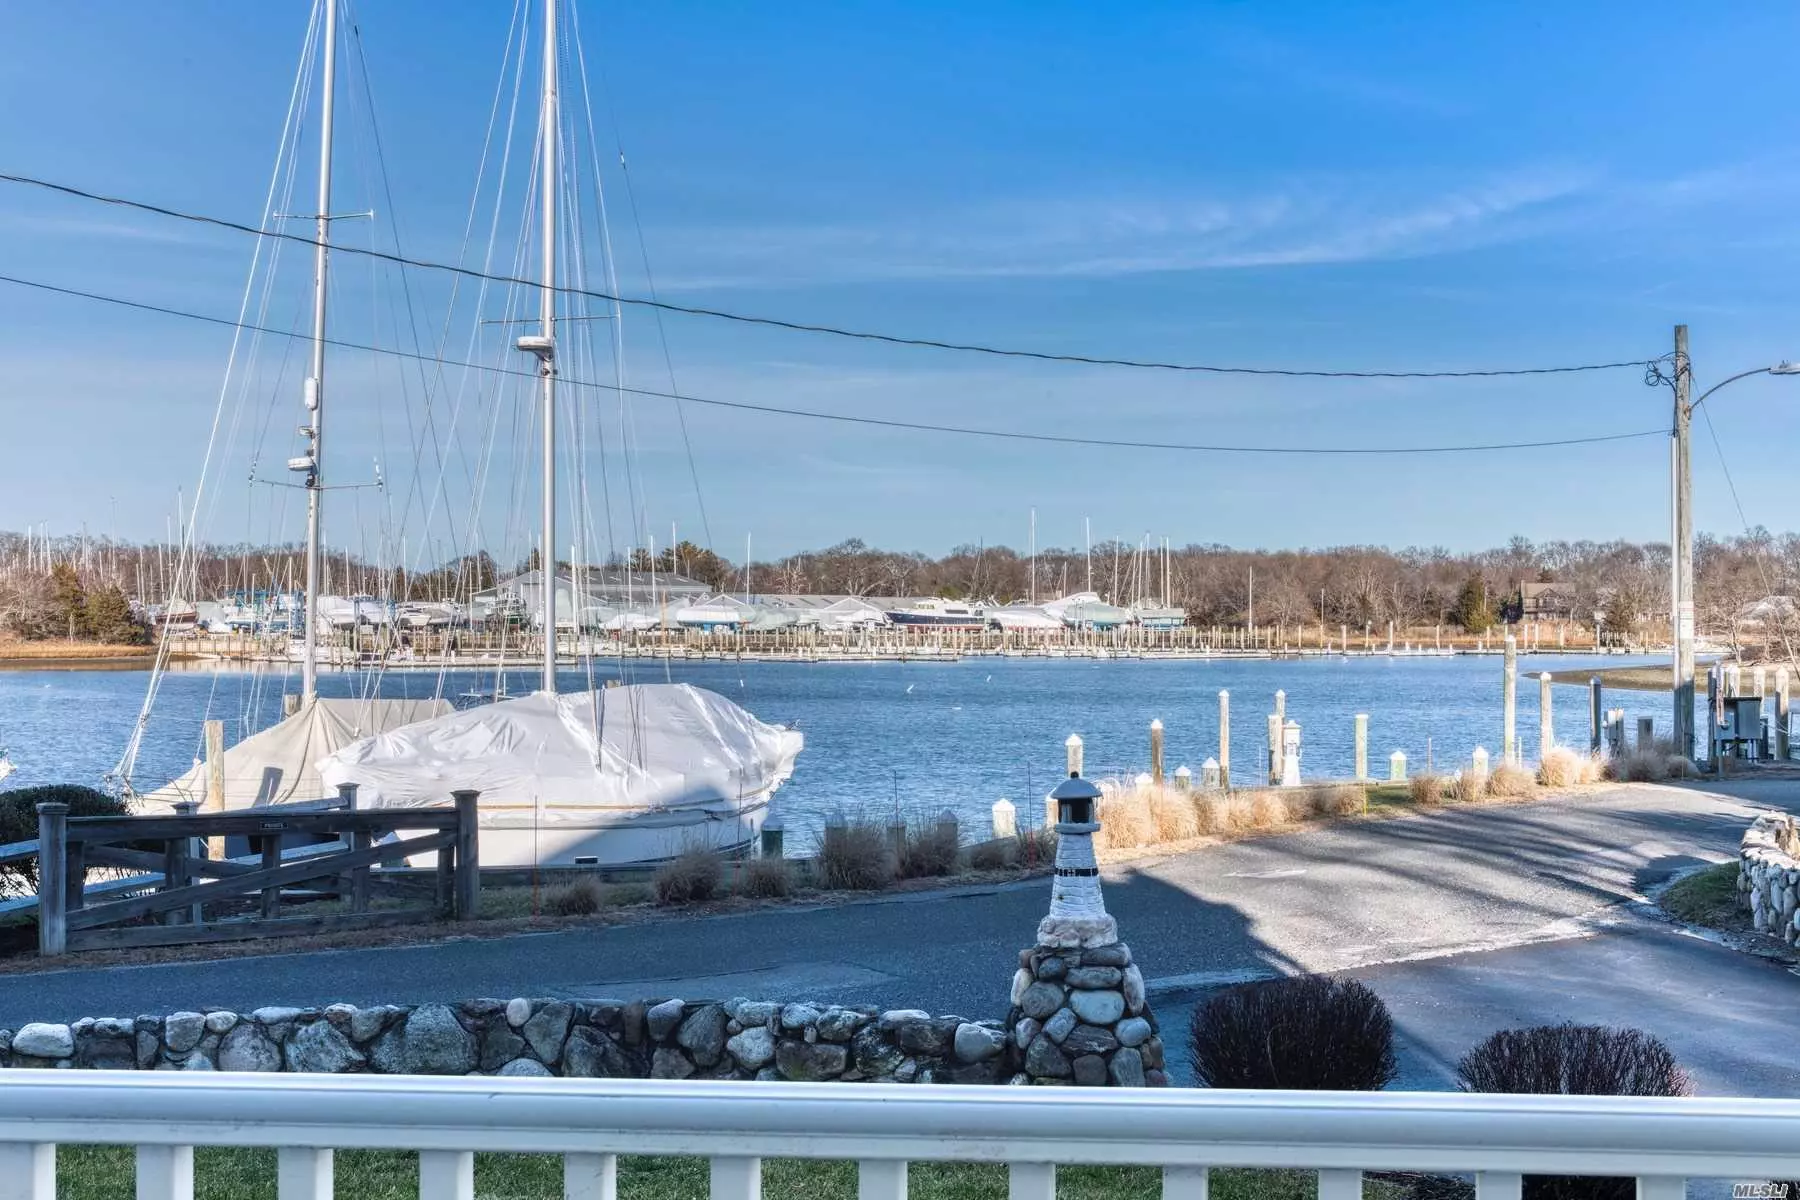 Enjoy easy, breezy living at this turn-key ground floor co-op with stunning harbor front views. This beautifully updated unit features an open water view kitchen and living room with a relaxing waterside deck. Perfect as a pied a Terre or for year round living. Conveniently located near all of Greenport&rsquo;s fabulous dining, shops, and seaside historic charm. Keeping it simple never looked so good.